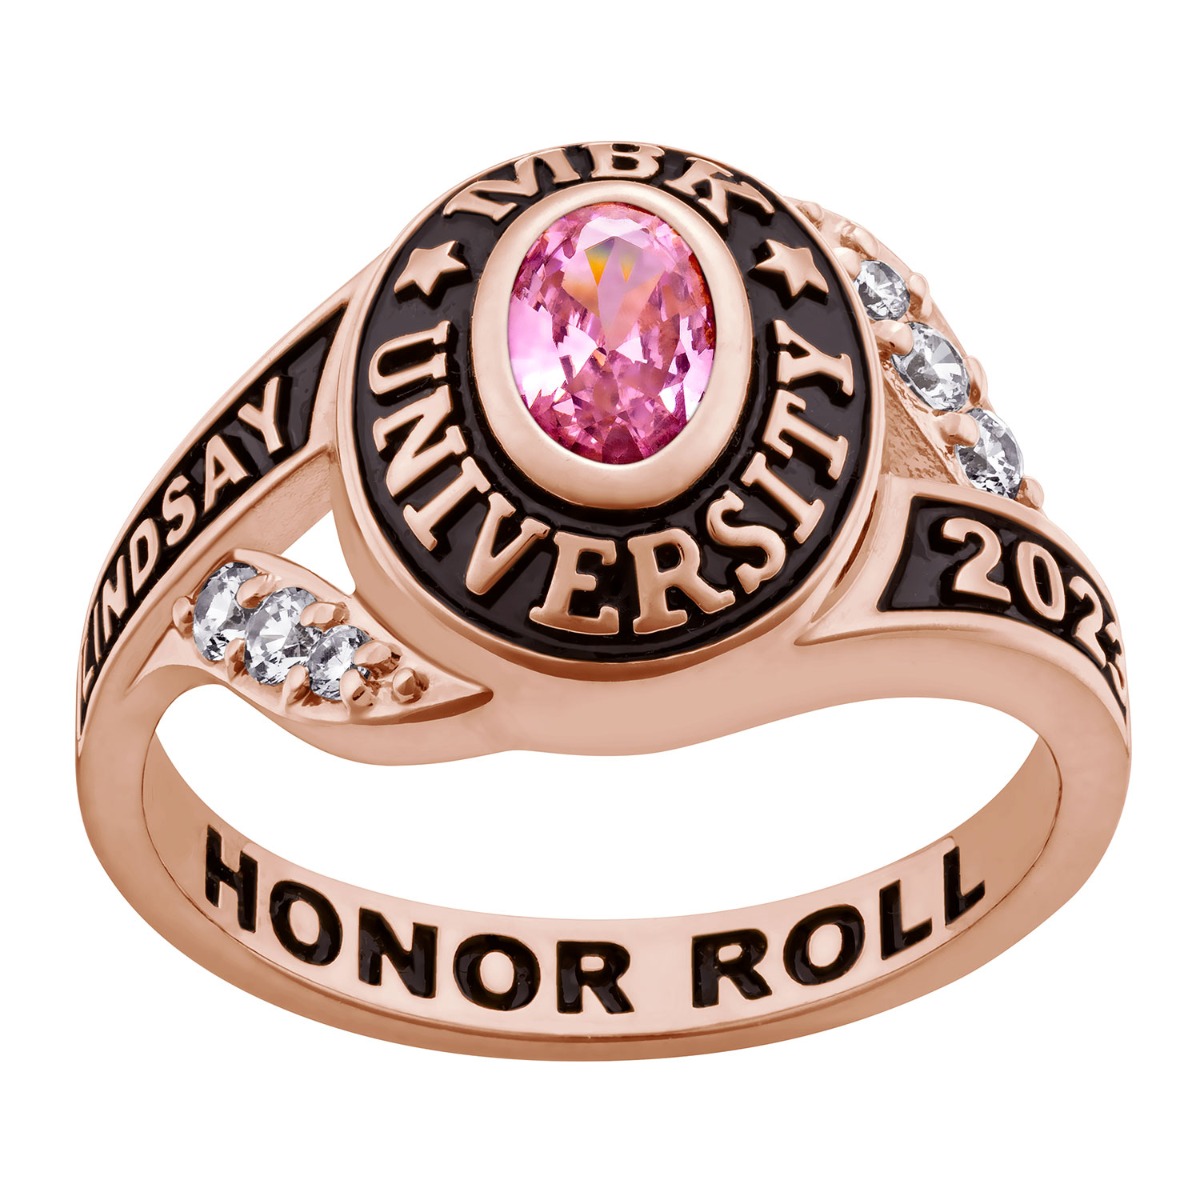 Ladies' 14K Rose Gold over Sterling Birthstone Traditional Class Ring